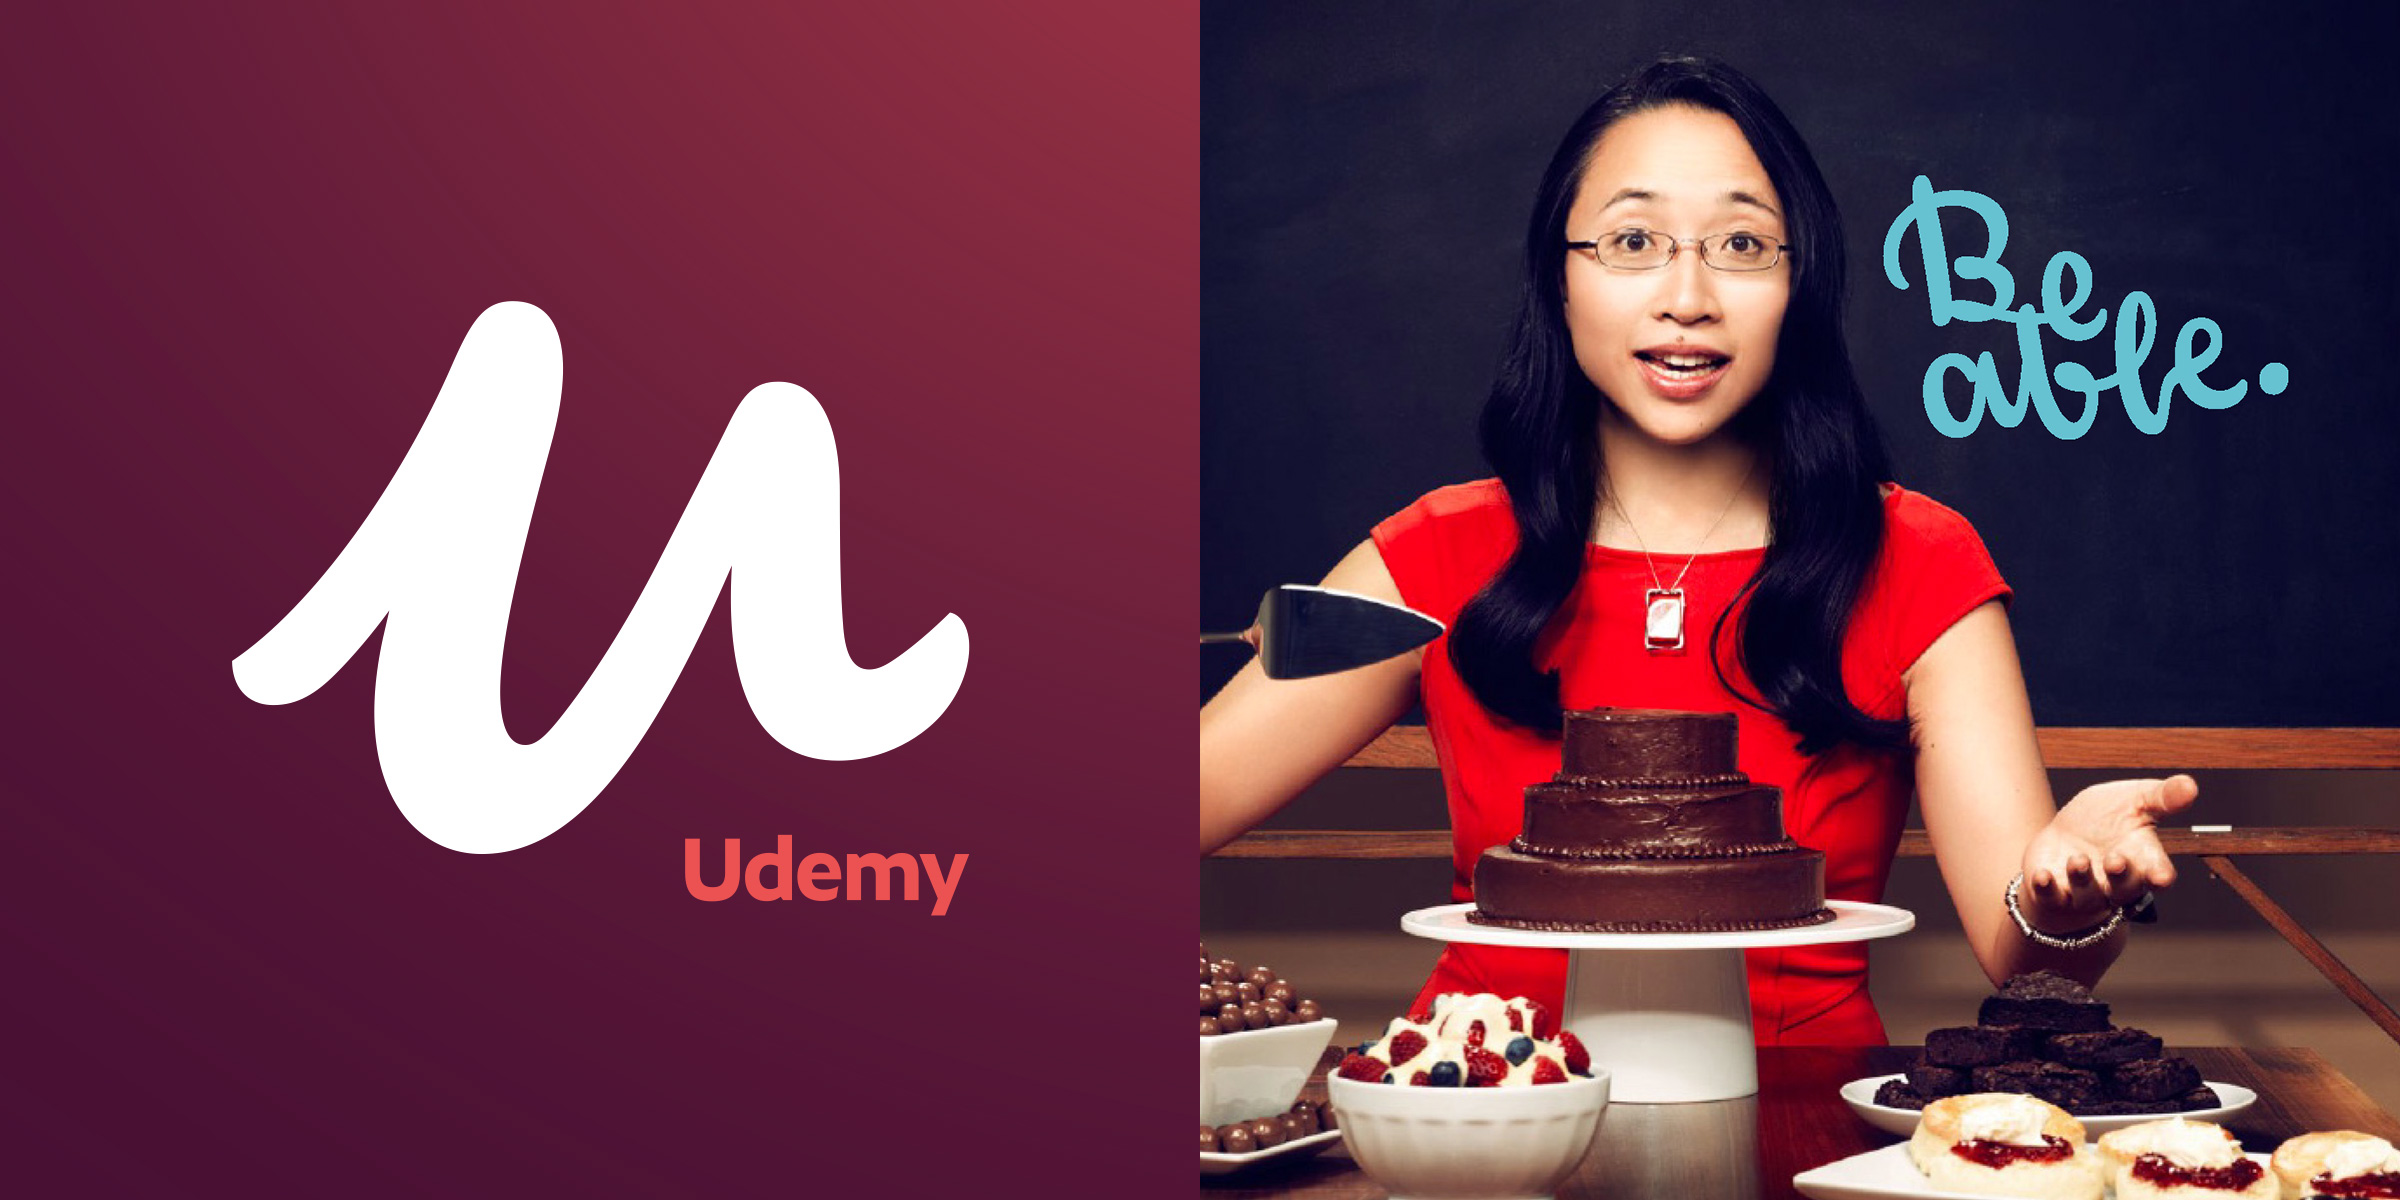 Grid image with two images. On the left is the Udemy logo, a burgundy background with a big letter “U” in white. The image on the right is a female presenting person in their twenties. She has several deserts in around her as she is sitting at a table with a slicing knife. She appears to be in mid sentence as if she is demonstrating something on the topic of baking.